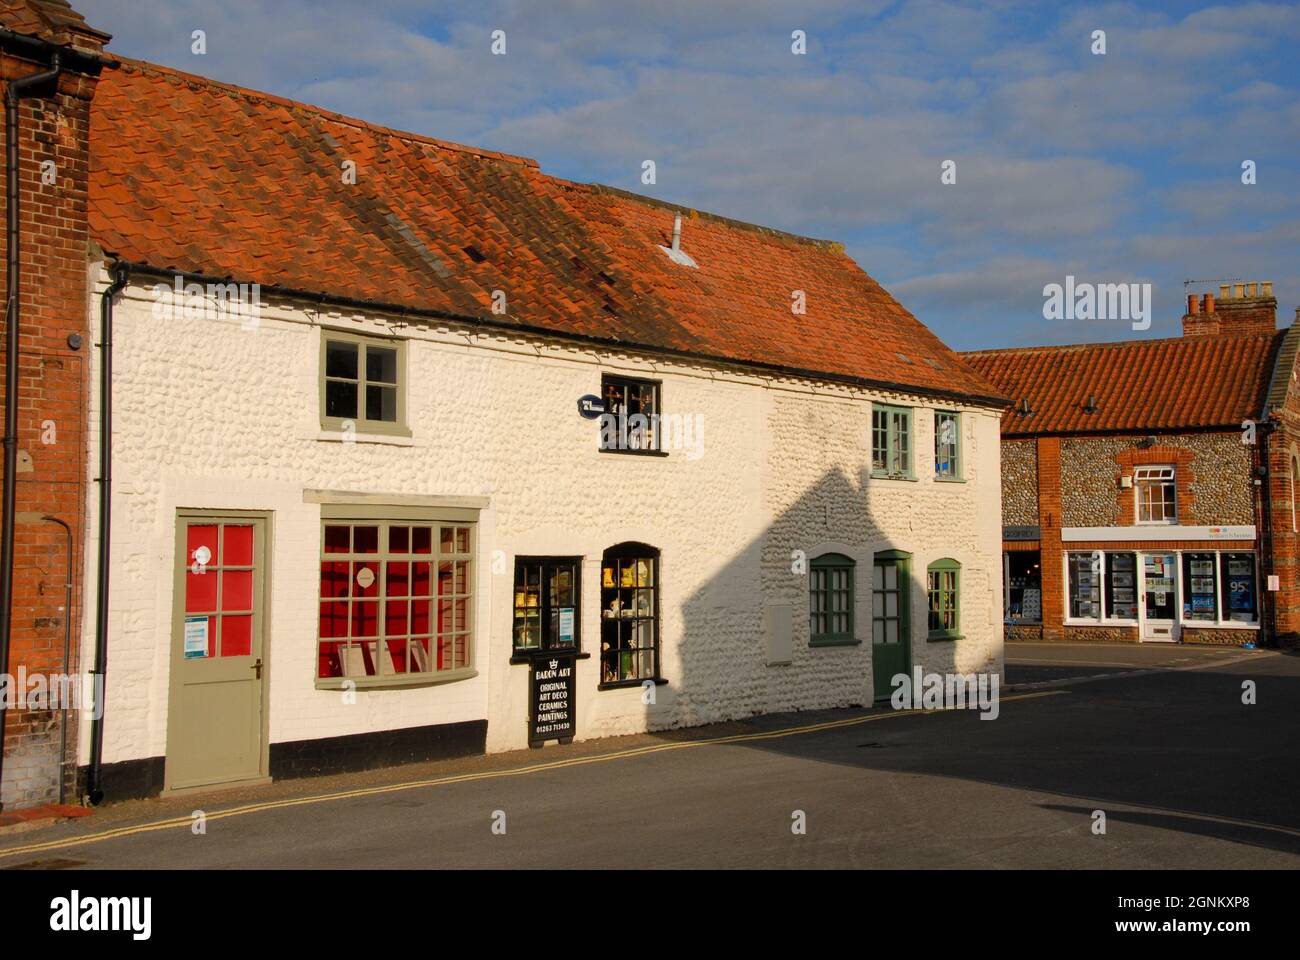 Building in the market town of Holt, Norfolk, England with flint wall painted over, and tiled roof, 2013 Stock Photo